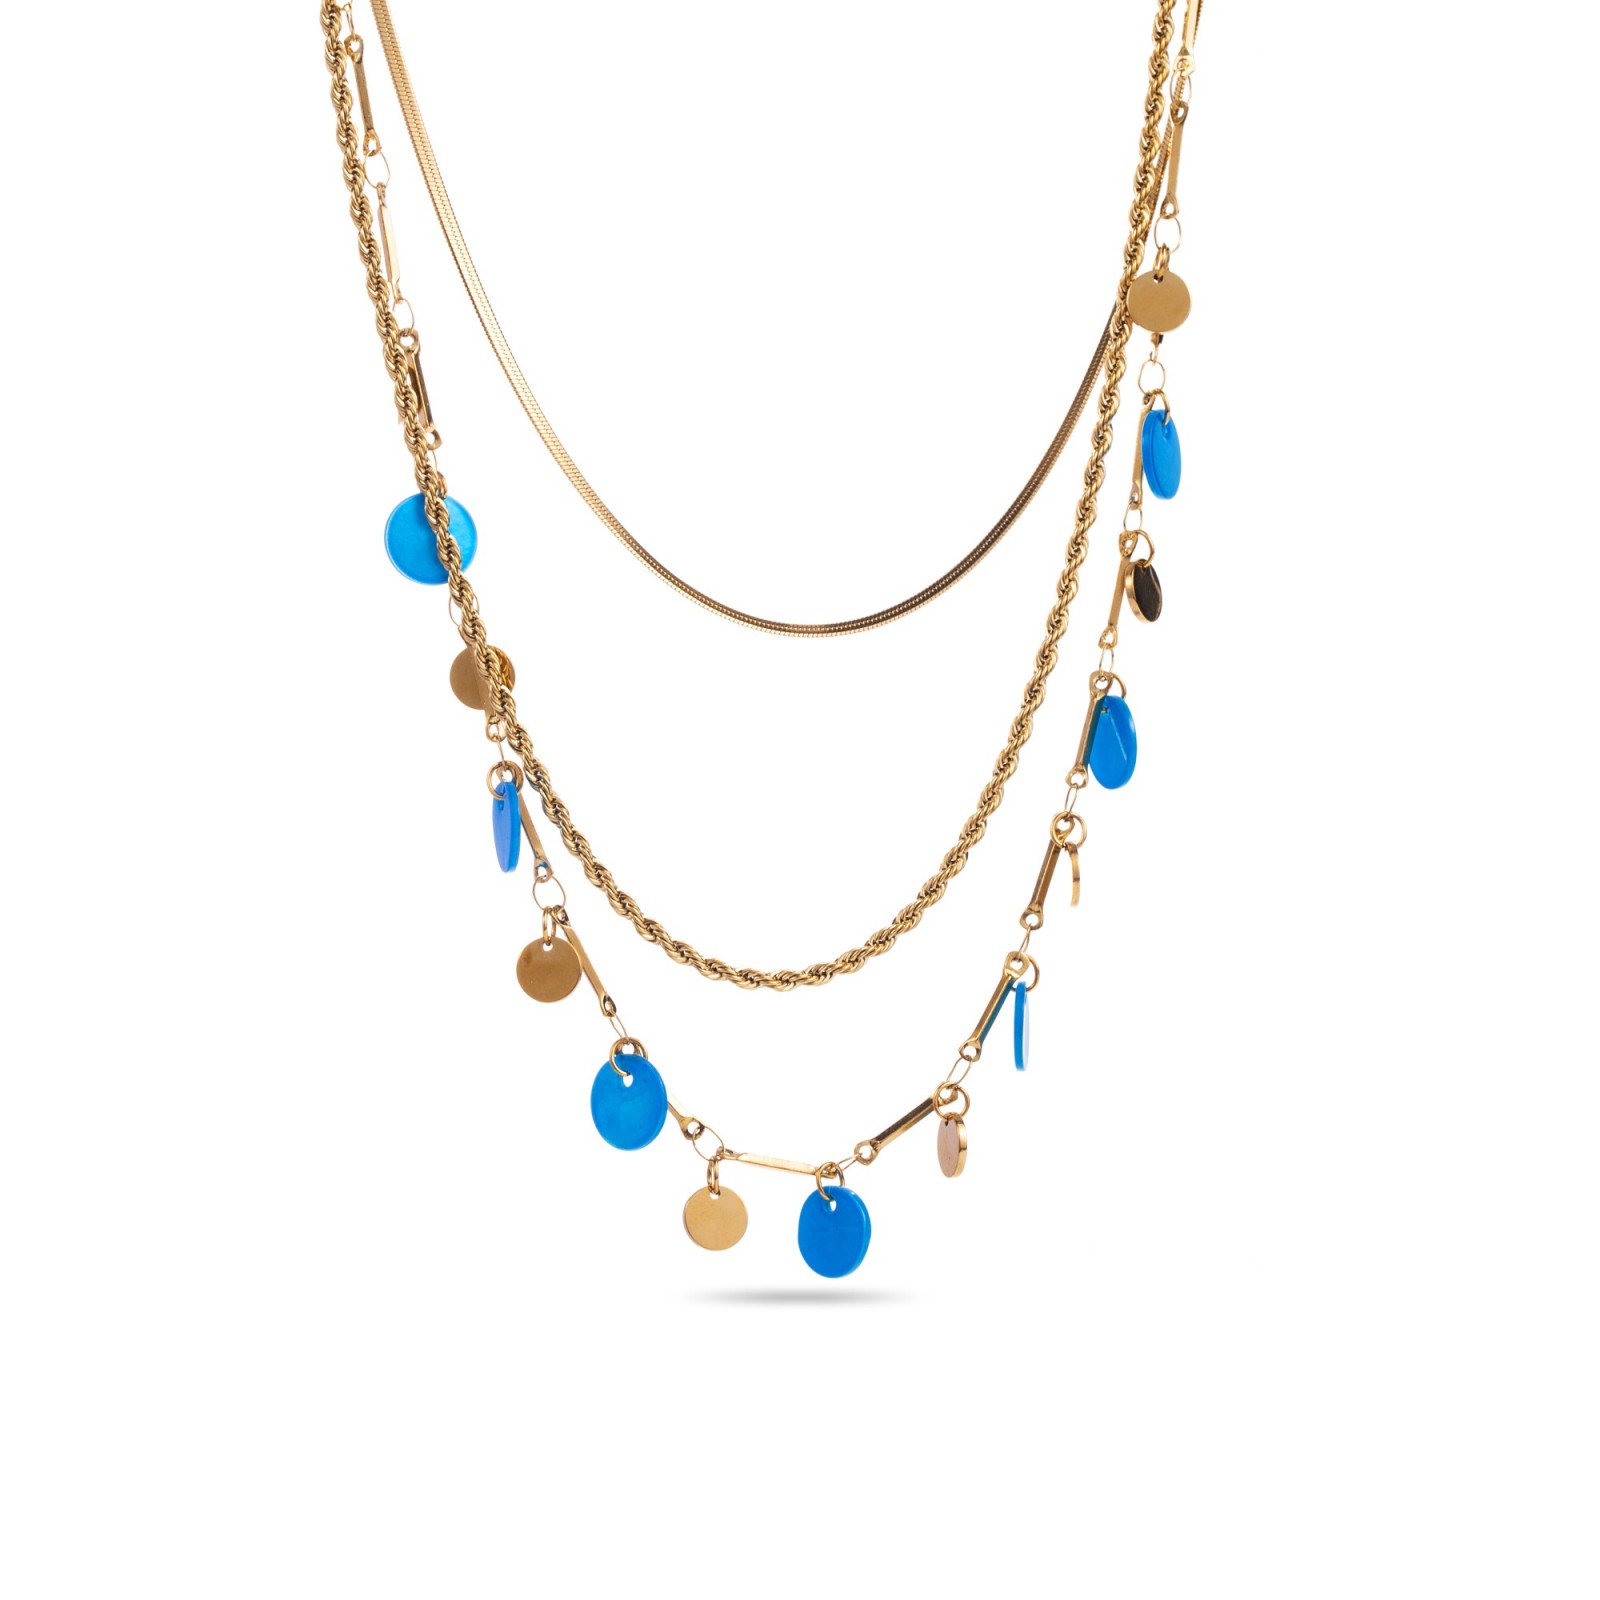 Multi-Row Necklace with Colored Mother-of-Pearl Tassel Color:Blue